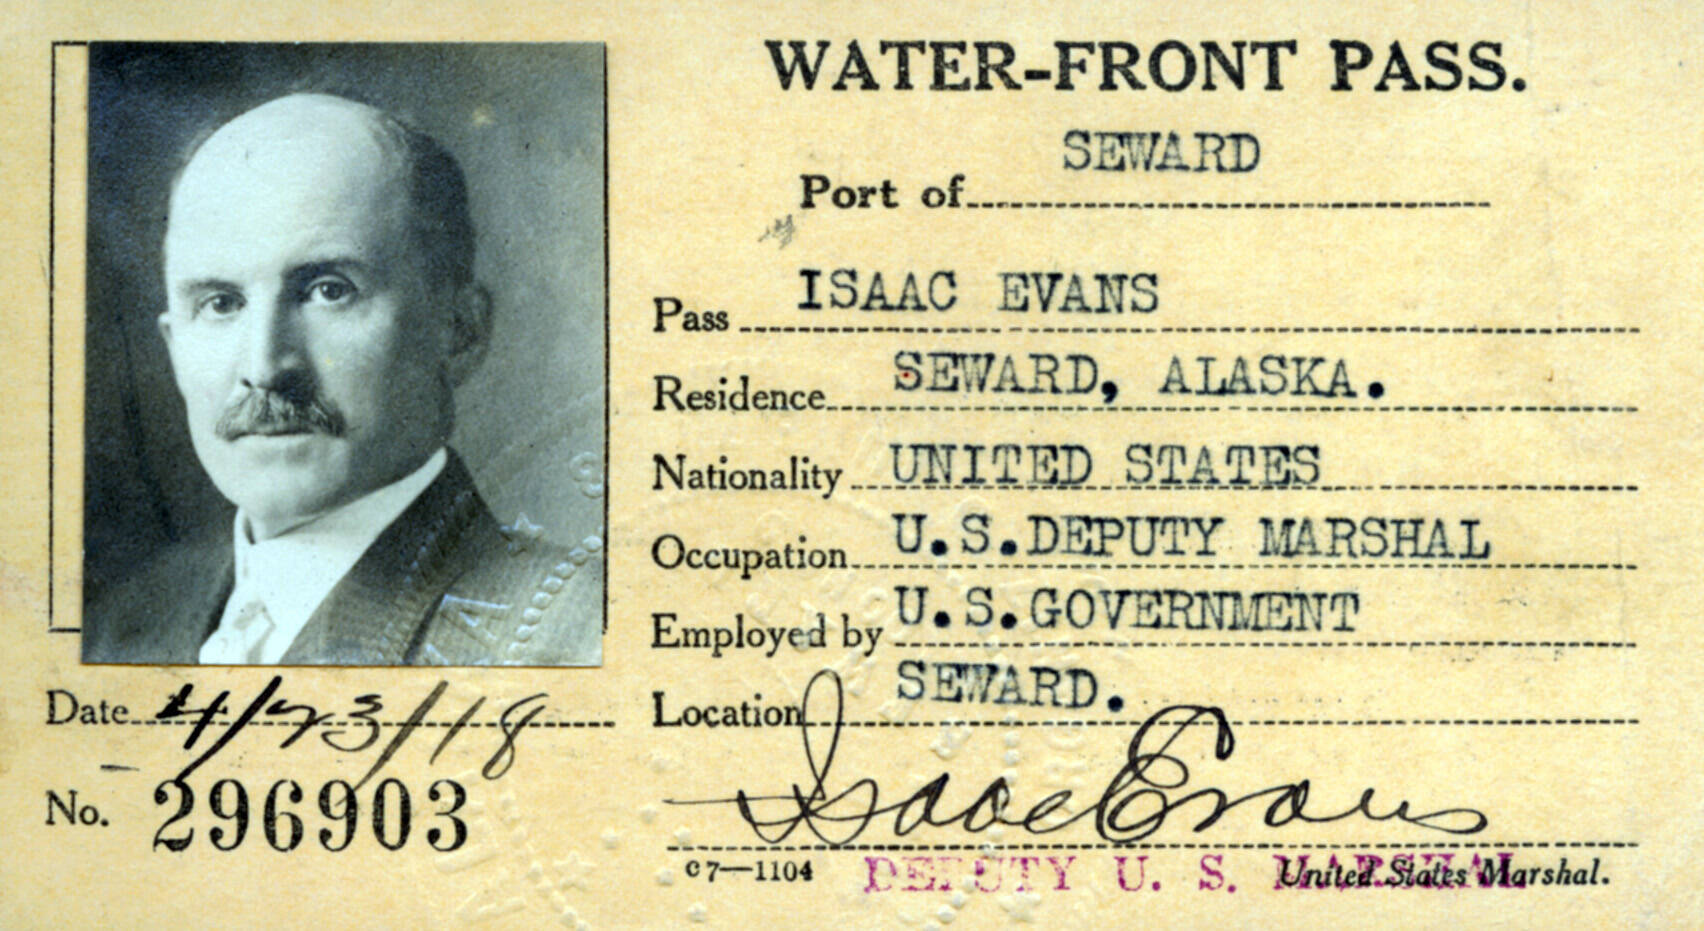 In 1918, a year before he would be gunned down on the streets of Seward, U.S. Deputy Marshal Isaac Evans posed for this photo on his Port of Seward waterfront pass. (Image courtesy of the Resurrection Bay Historical Society)